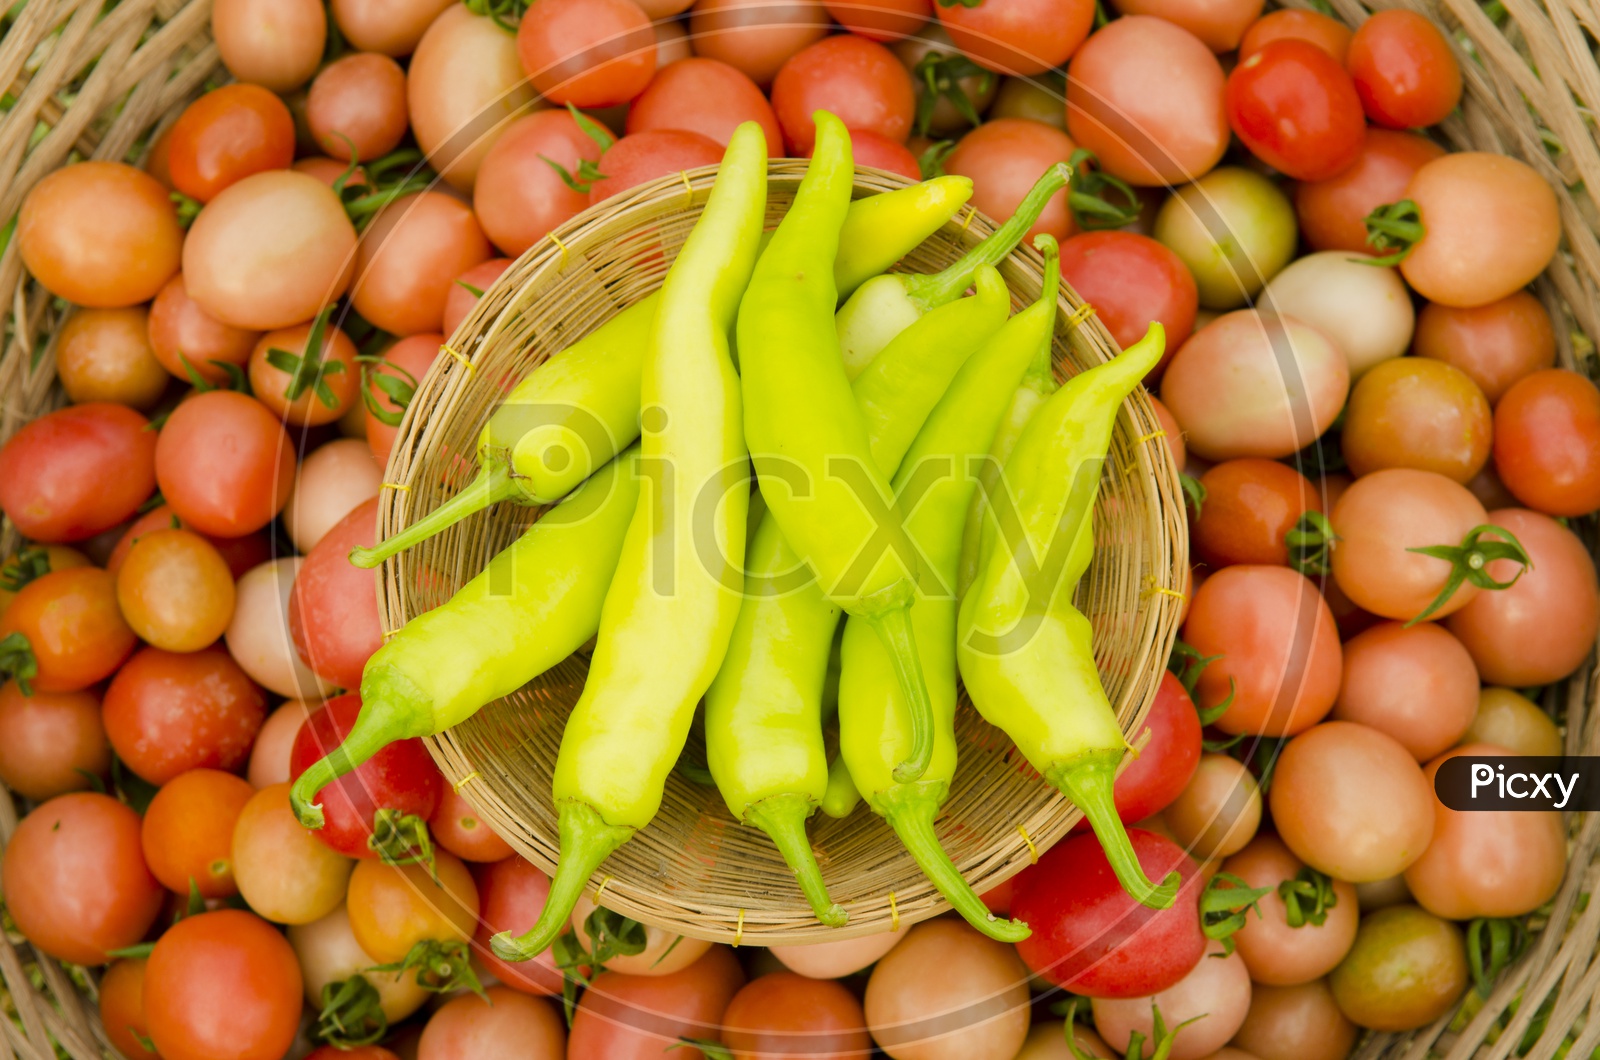 Green Chilies and Tomatoes in a Basket